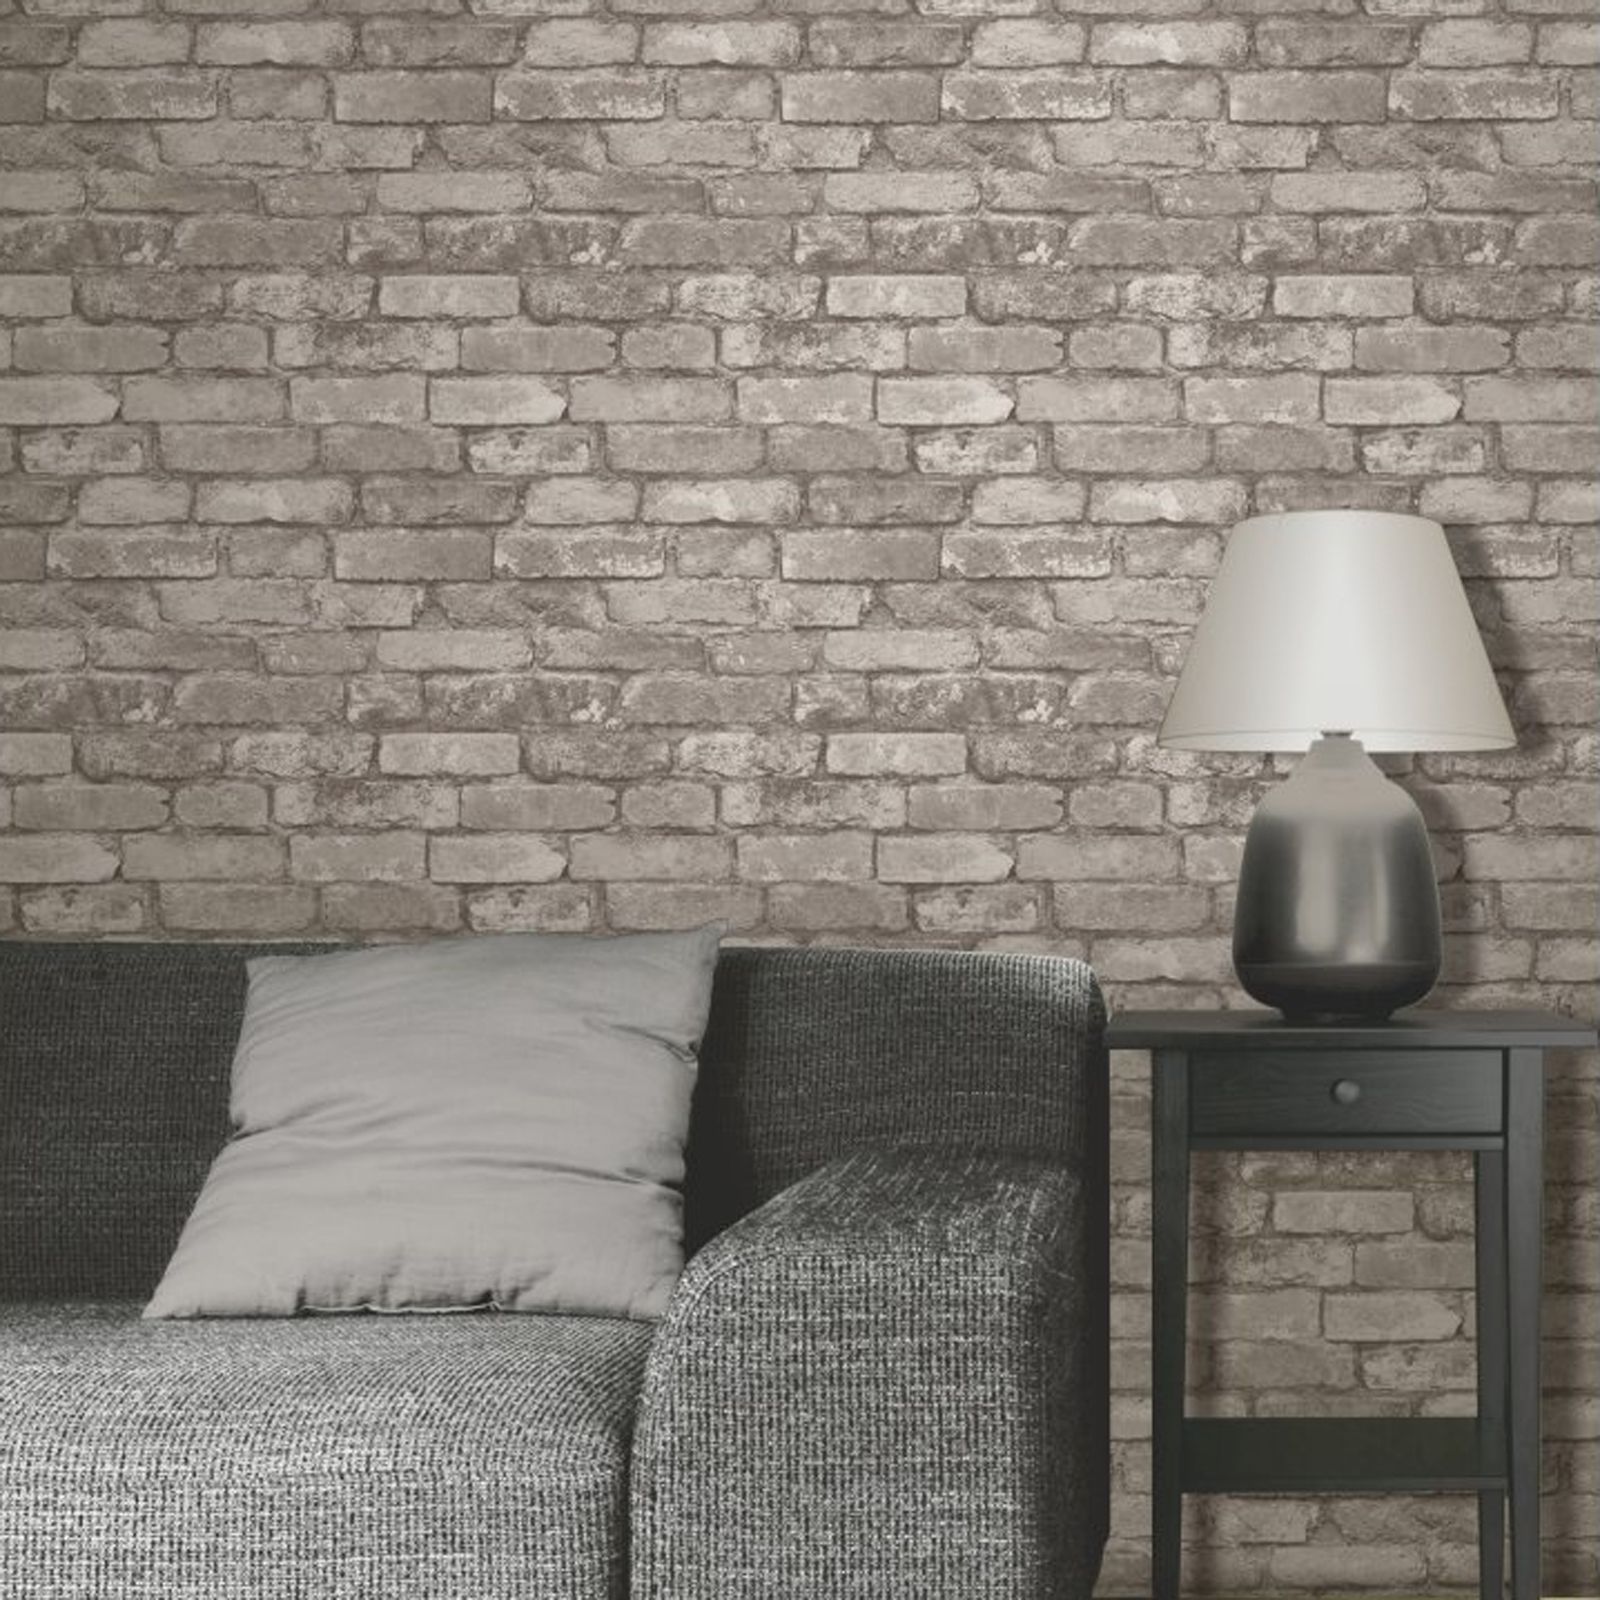 Details About Rustic Brick Effect Wallpaper 10m Silver Grey New Fine